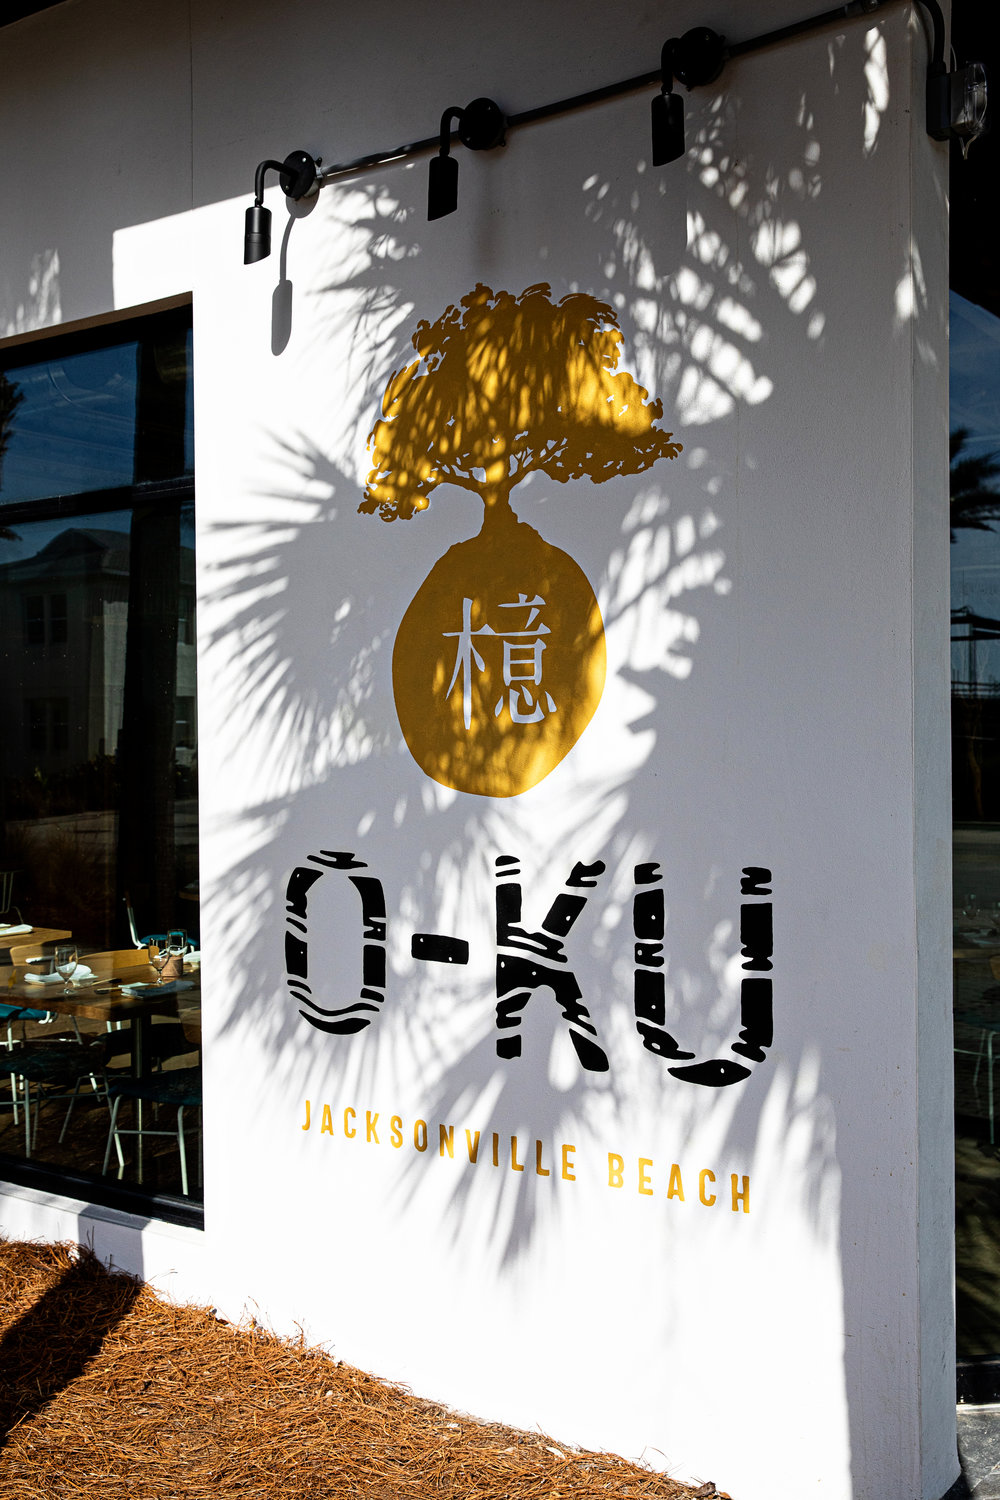 O-Ku is a new sushi restaurant in Jacksonville Beach.